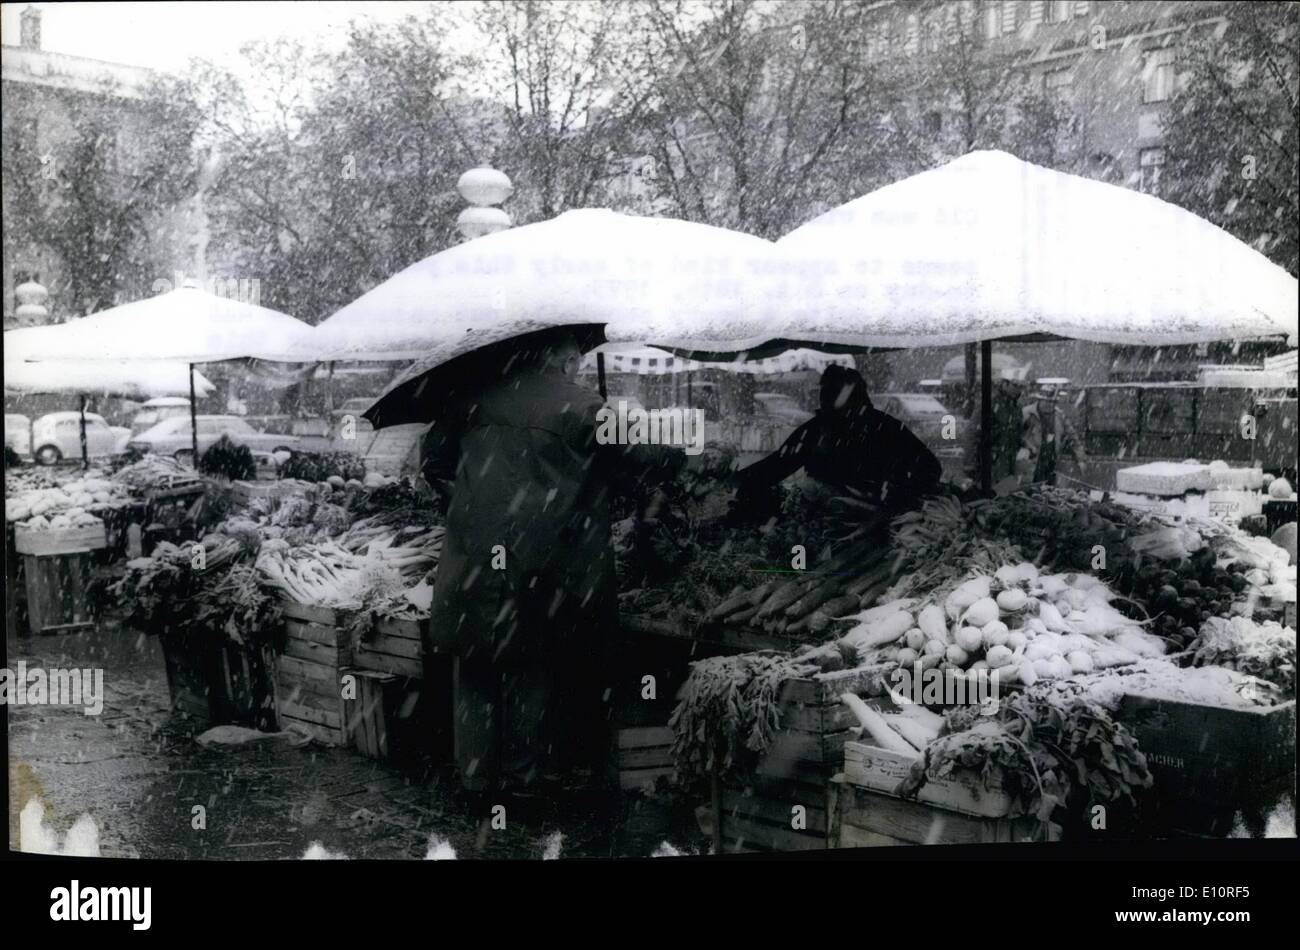 Oct. 10, 1973 - This year's first fall of snow in Munich Old man winter... seems to appear kind of early this year, actually to-day on Oct. 18th, 1973. It was quite a heavy snowfall, but naturally - and fortunately the snow did not stay. Let's hope this is not a sign of a very early beginning of the wintery season, after all this is still the first month of autumn only. Ops. View at the big umbrellas of the Victualienmarkt, Munich's green grocery market, which were quickly covered heavily by white snow. Stock Photo